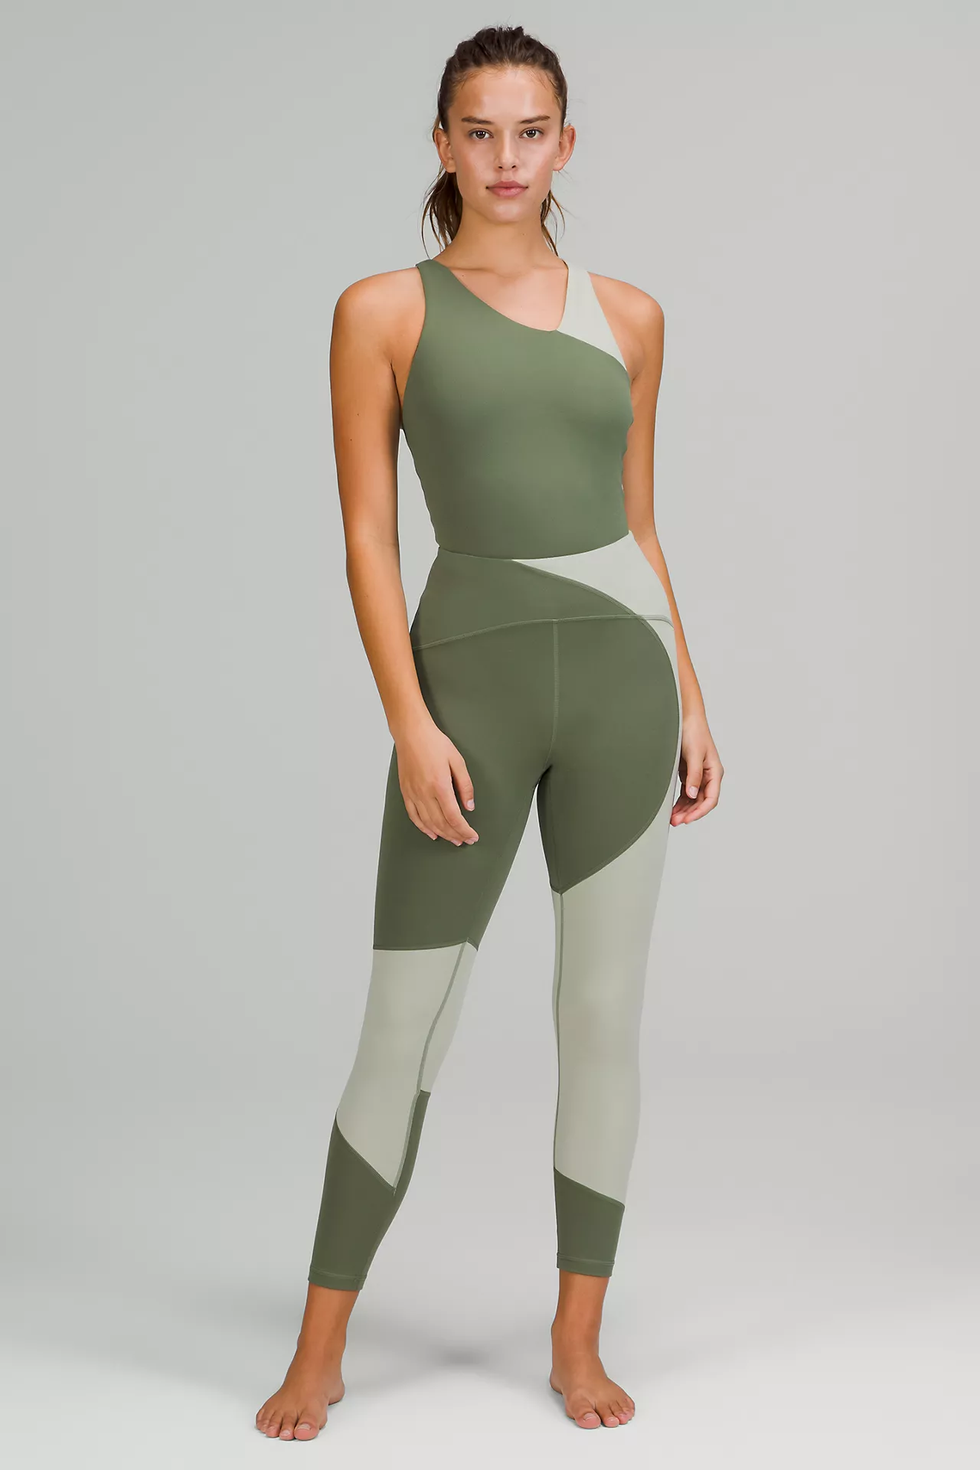 19 Best Workout Bodysuits to Shop in 2022